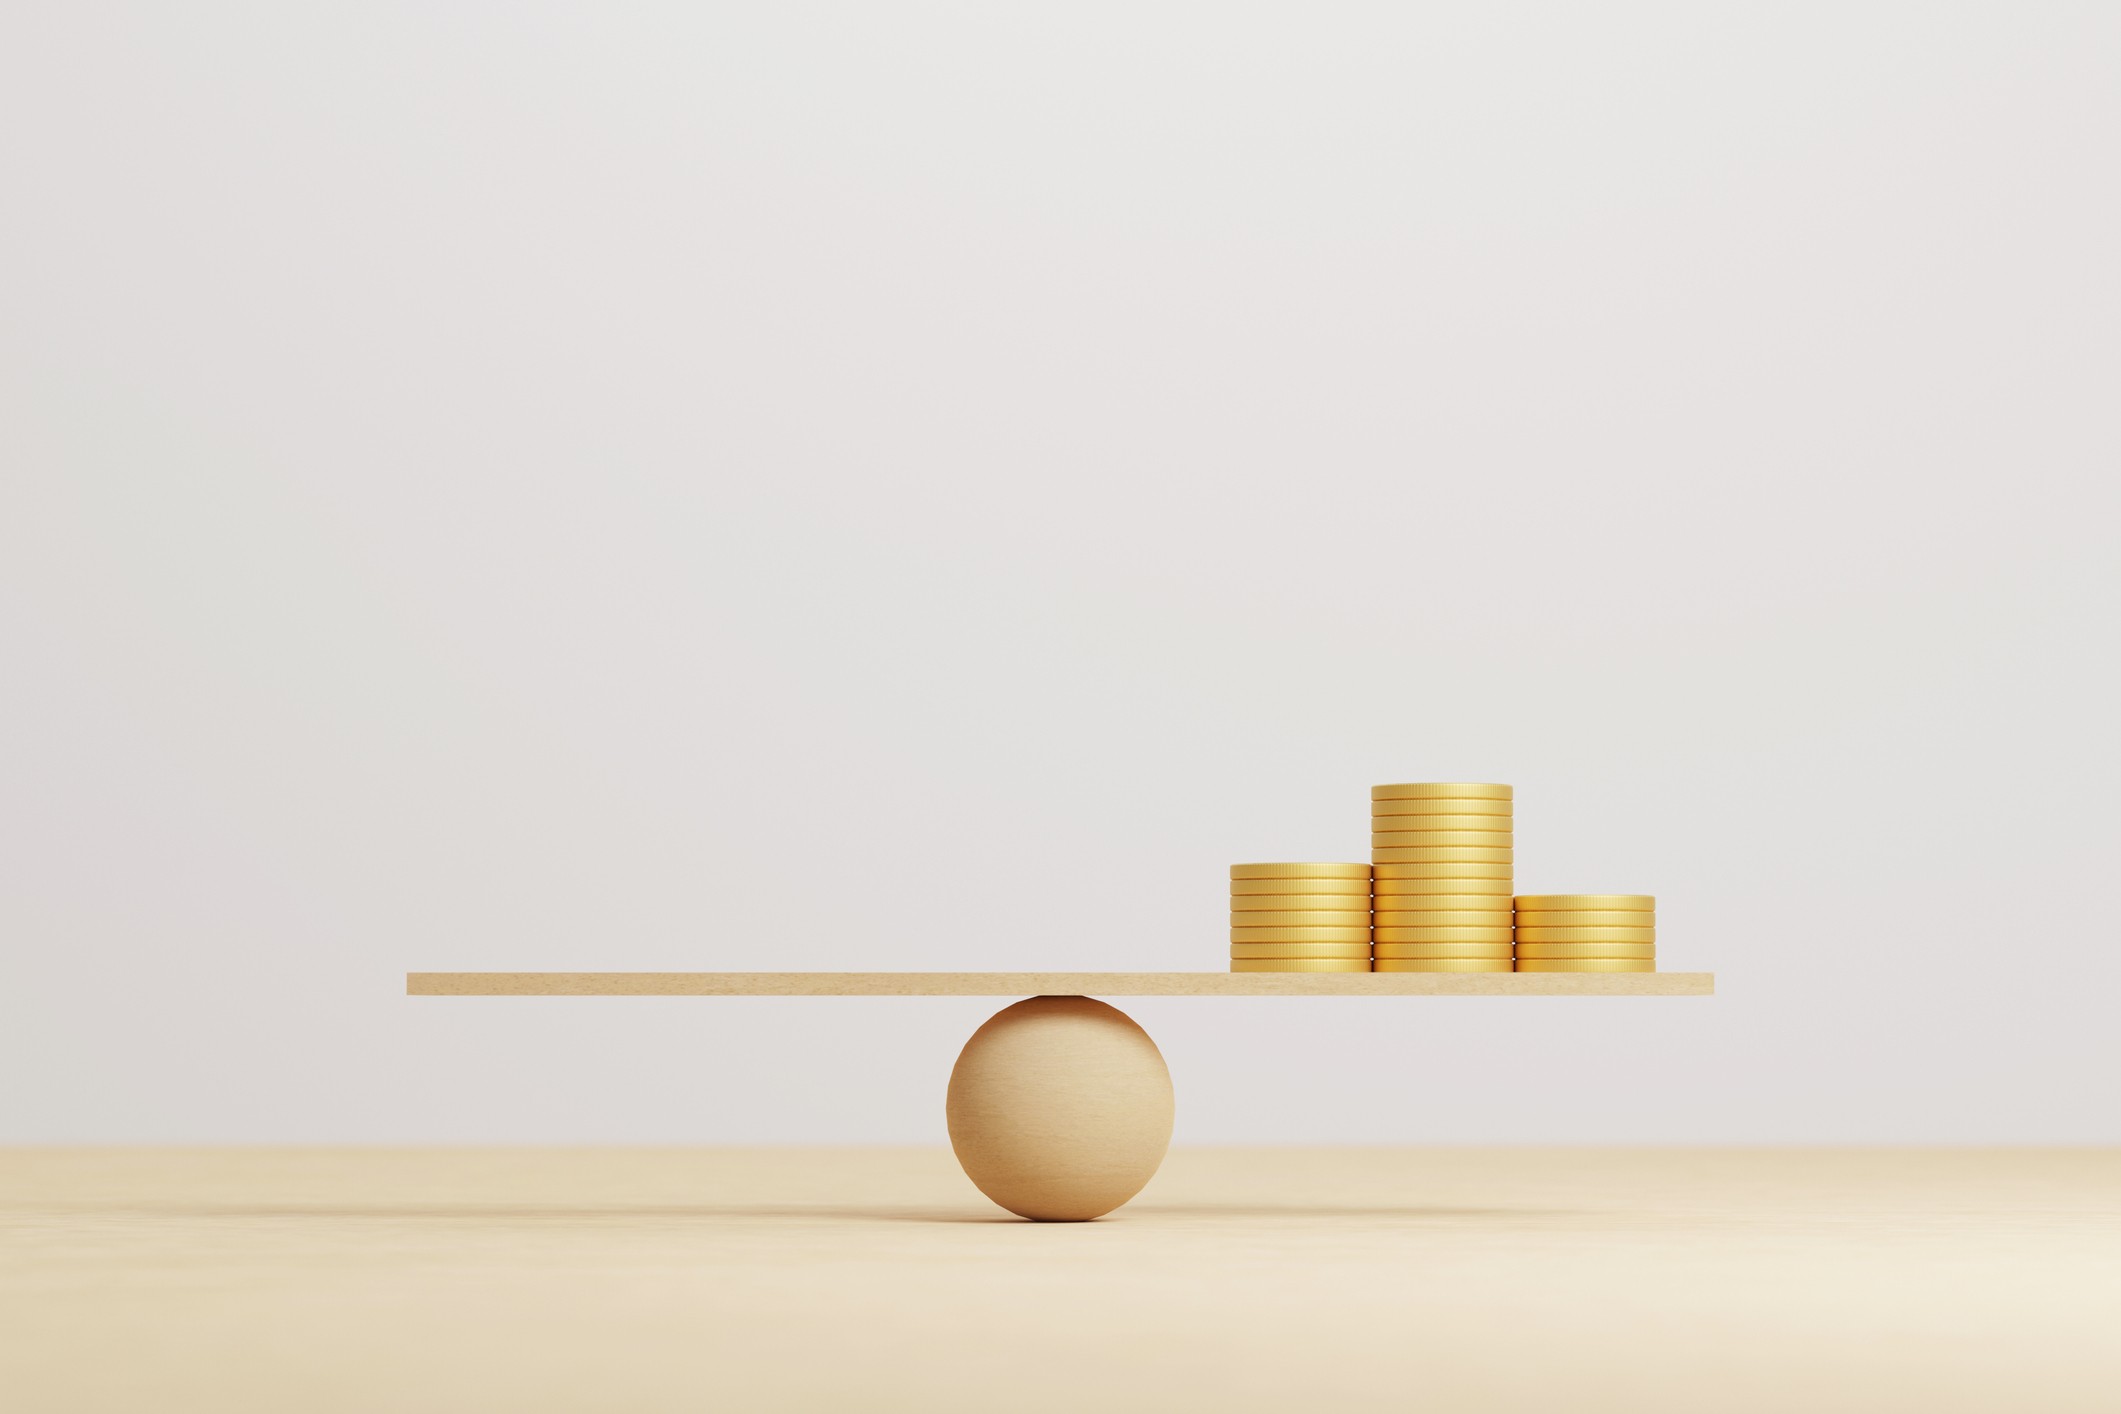 Money coin stack on wood scale seesaw